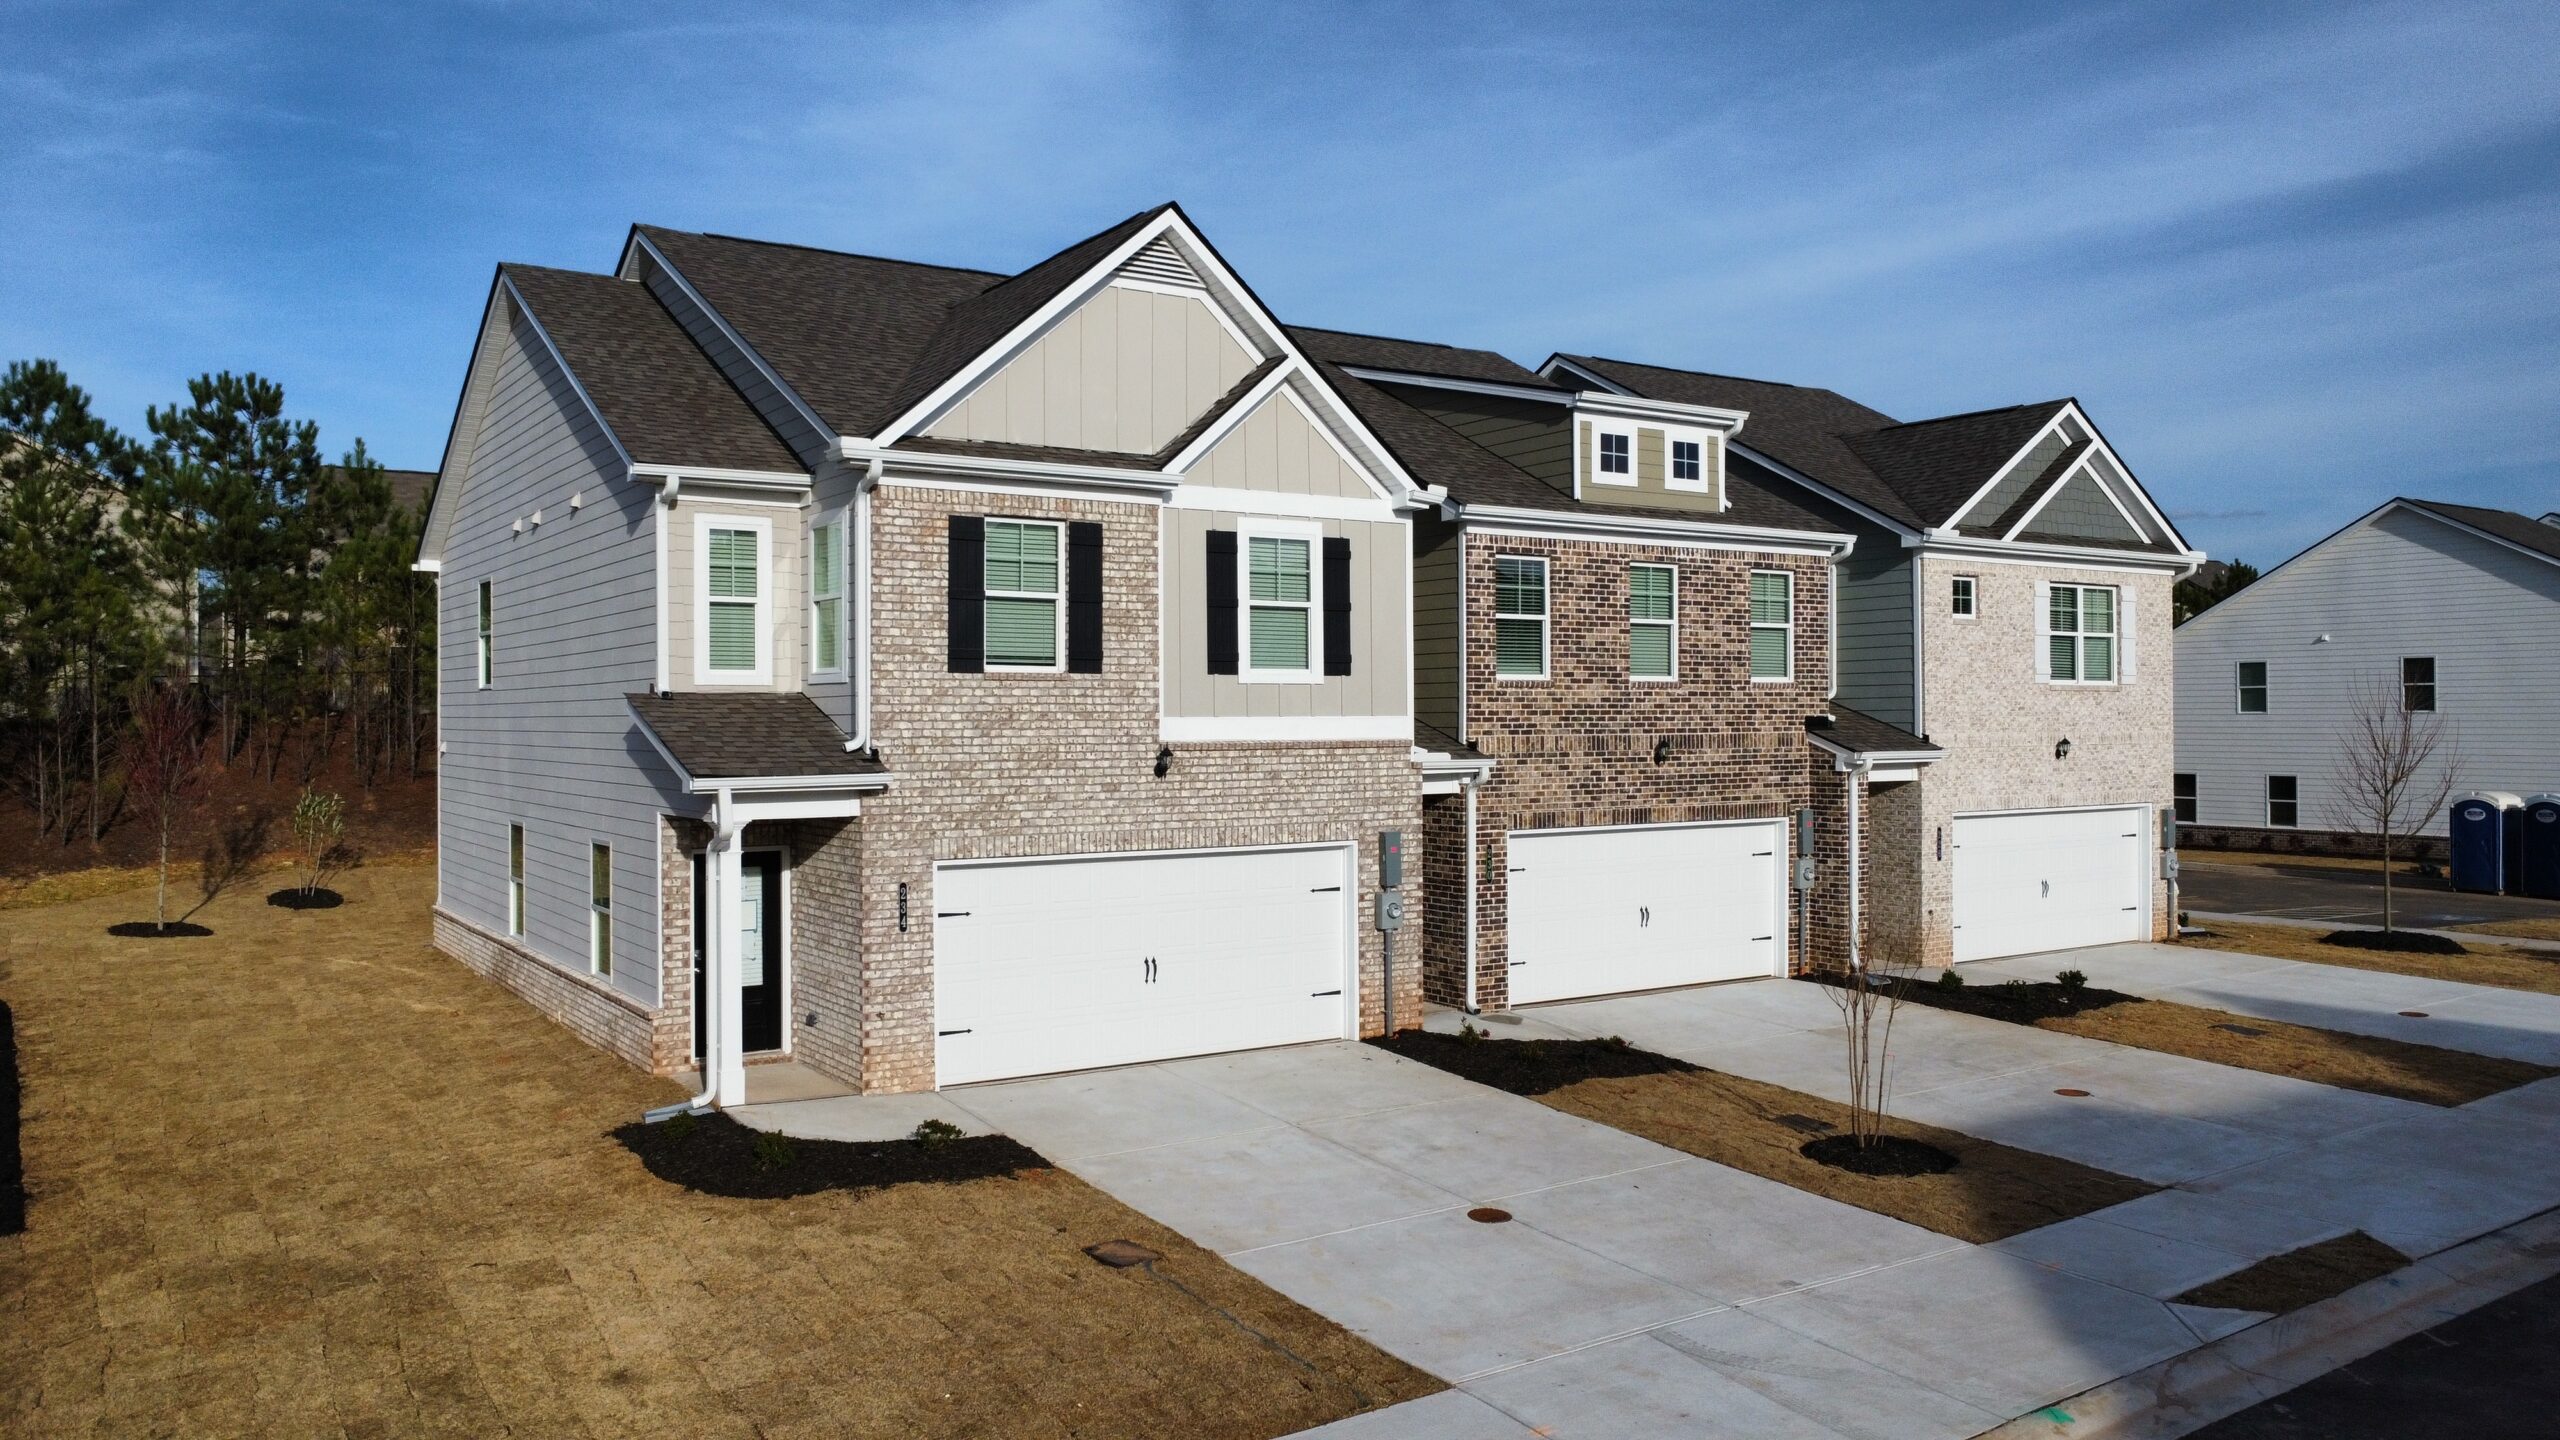 New homes around Atlanta from Direct Residential Communities